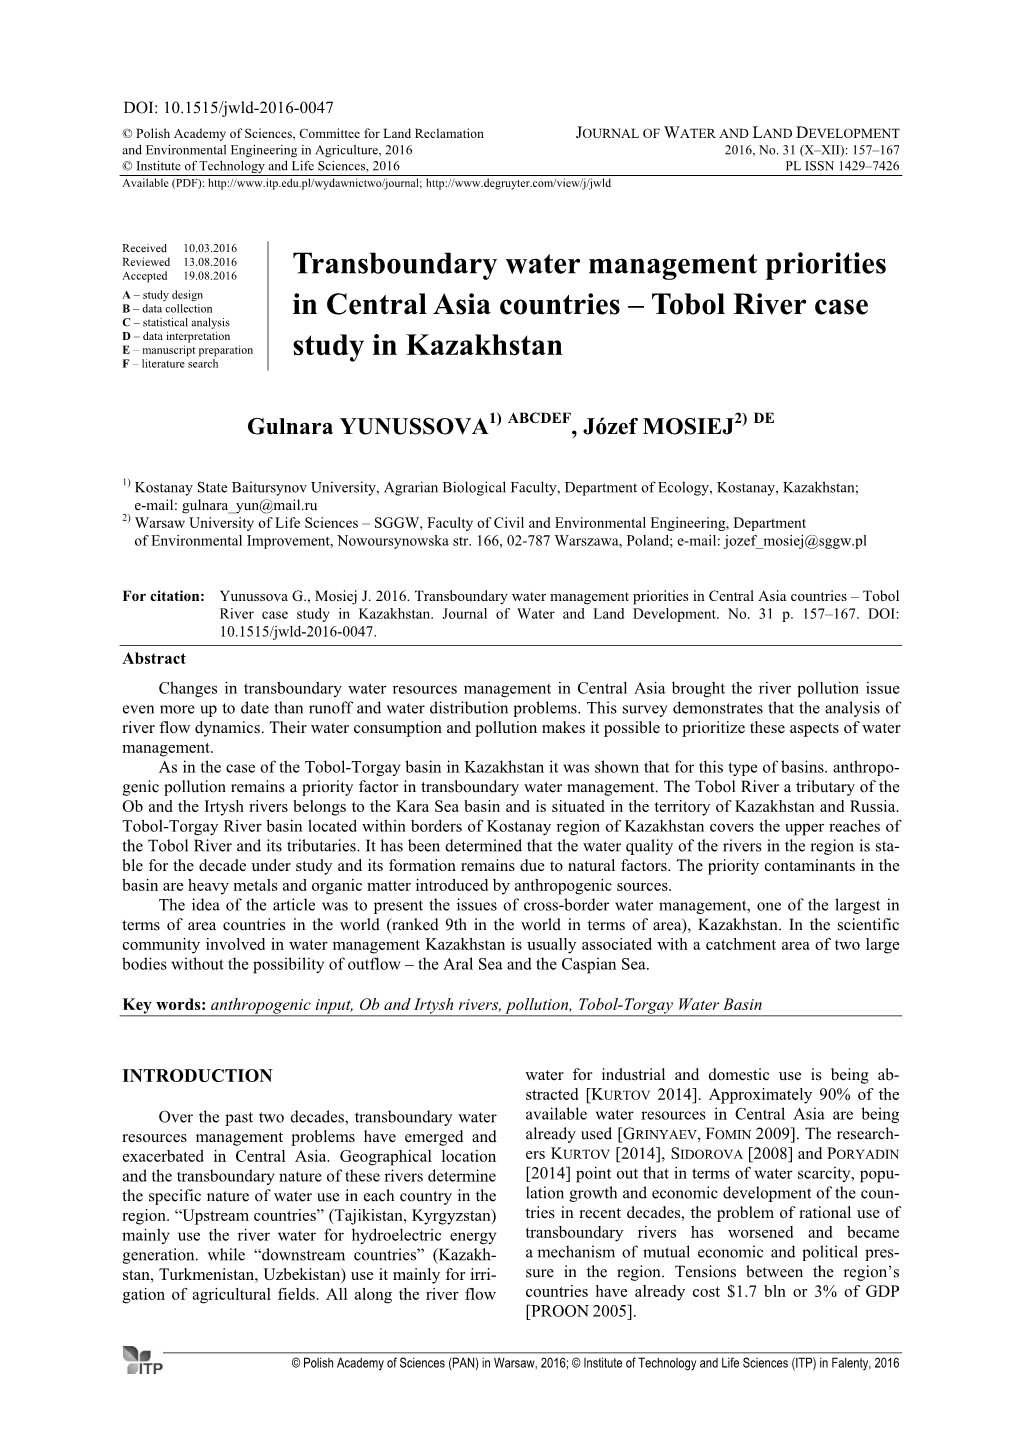 Transboundary Water Management Priorities in Central Asia Countries – Tobol River Case Study in Kazakhstan